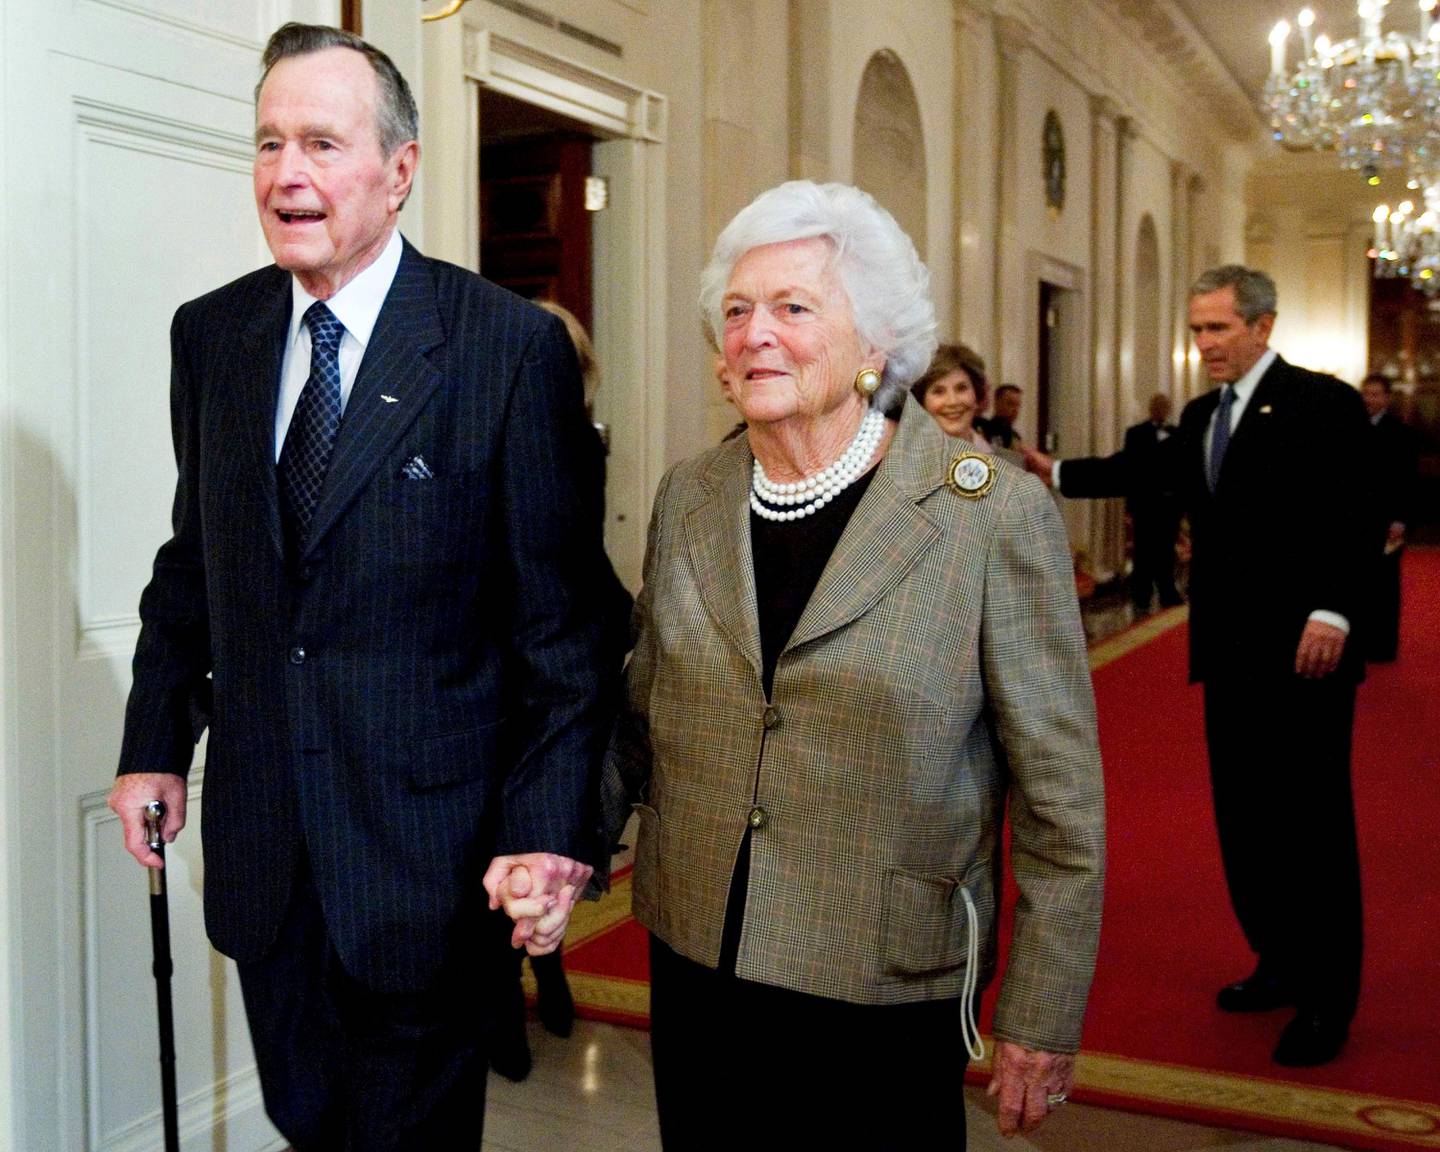 FILE - In this Jan. 7, 2009, file photo, former President George H. W. Bush, left, walks with his wife, former first lady Barbara Bush, followed by their son, President George W. Bush, and his wife first lady Laura Bush, to a reception in honor of the Points of Light Institute, in the East Room at the White House in Washington. Bush died at the age of 94 on Friday, Nov. 30, 2018, about eight months after the death of his wife, Barbara Bush. (AP Photo/Manuel Balce Ceneta, File)